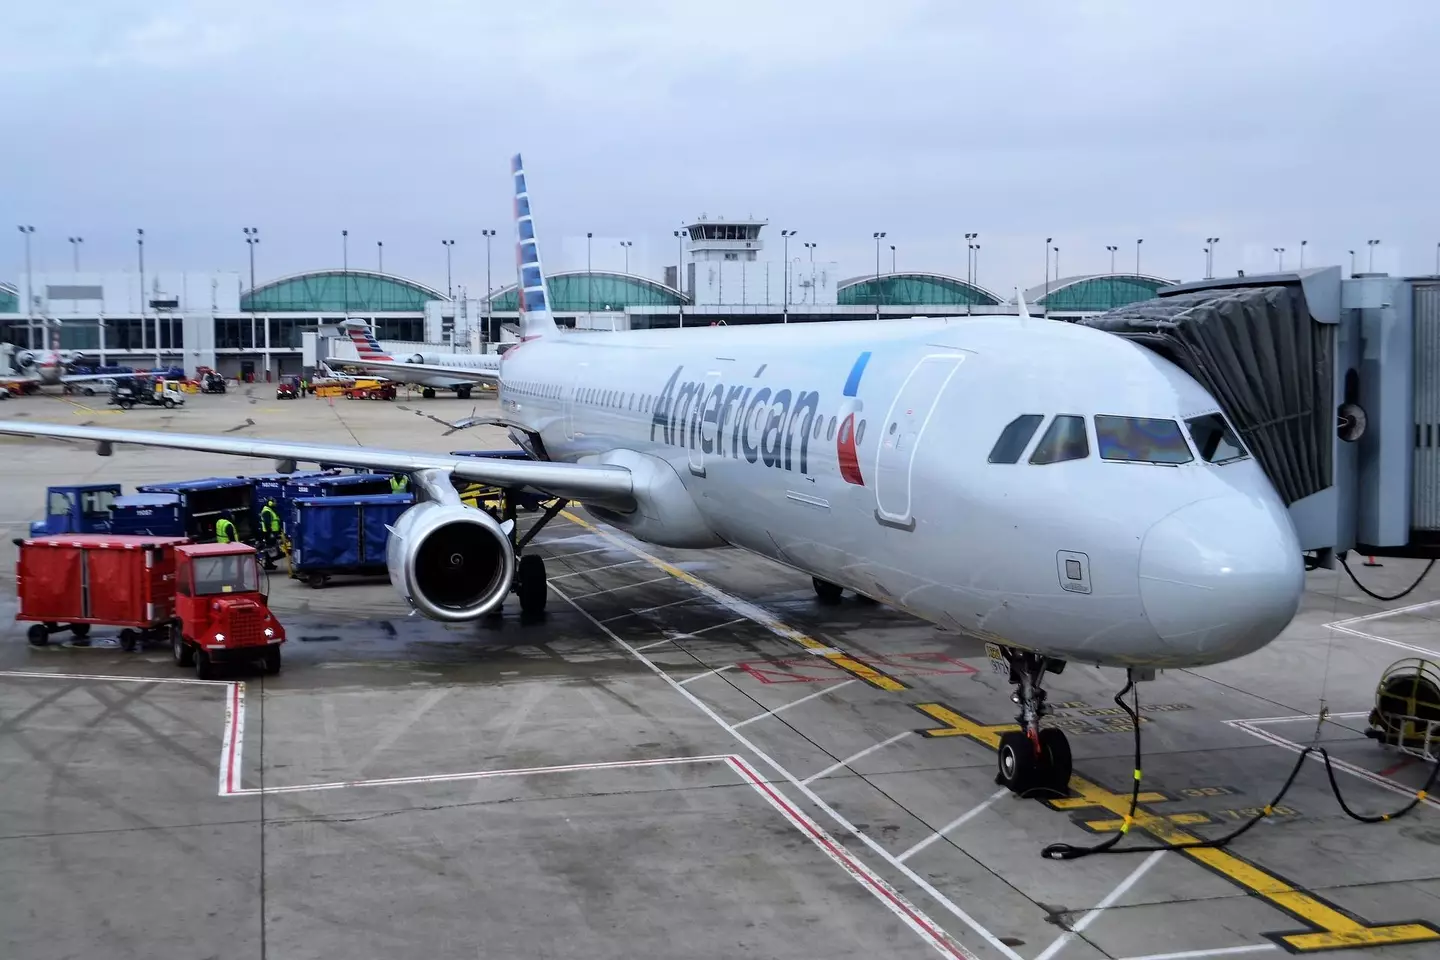 The man collapsed on an American Airlines flight.